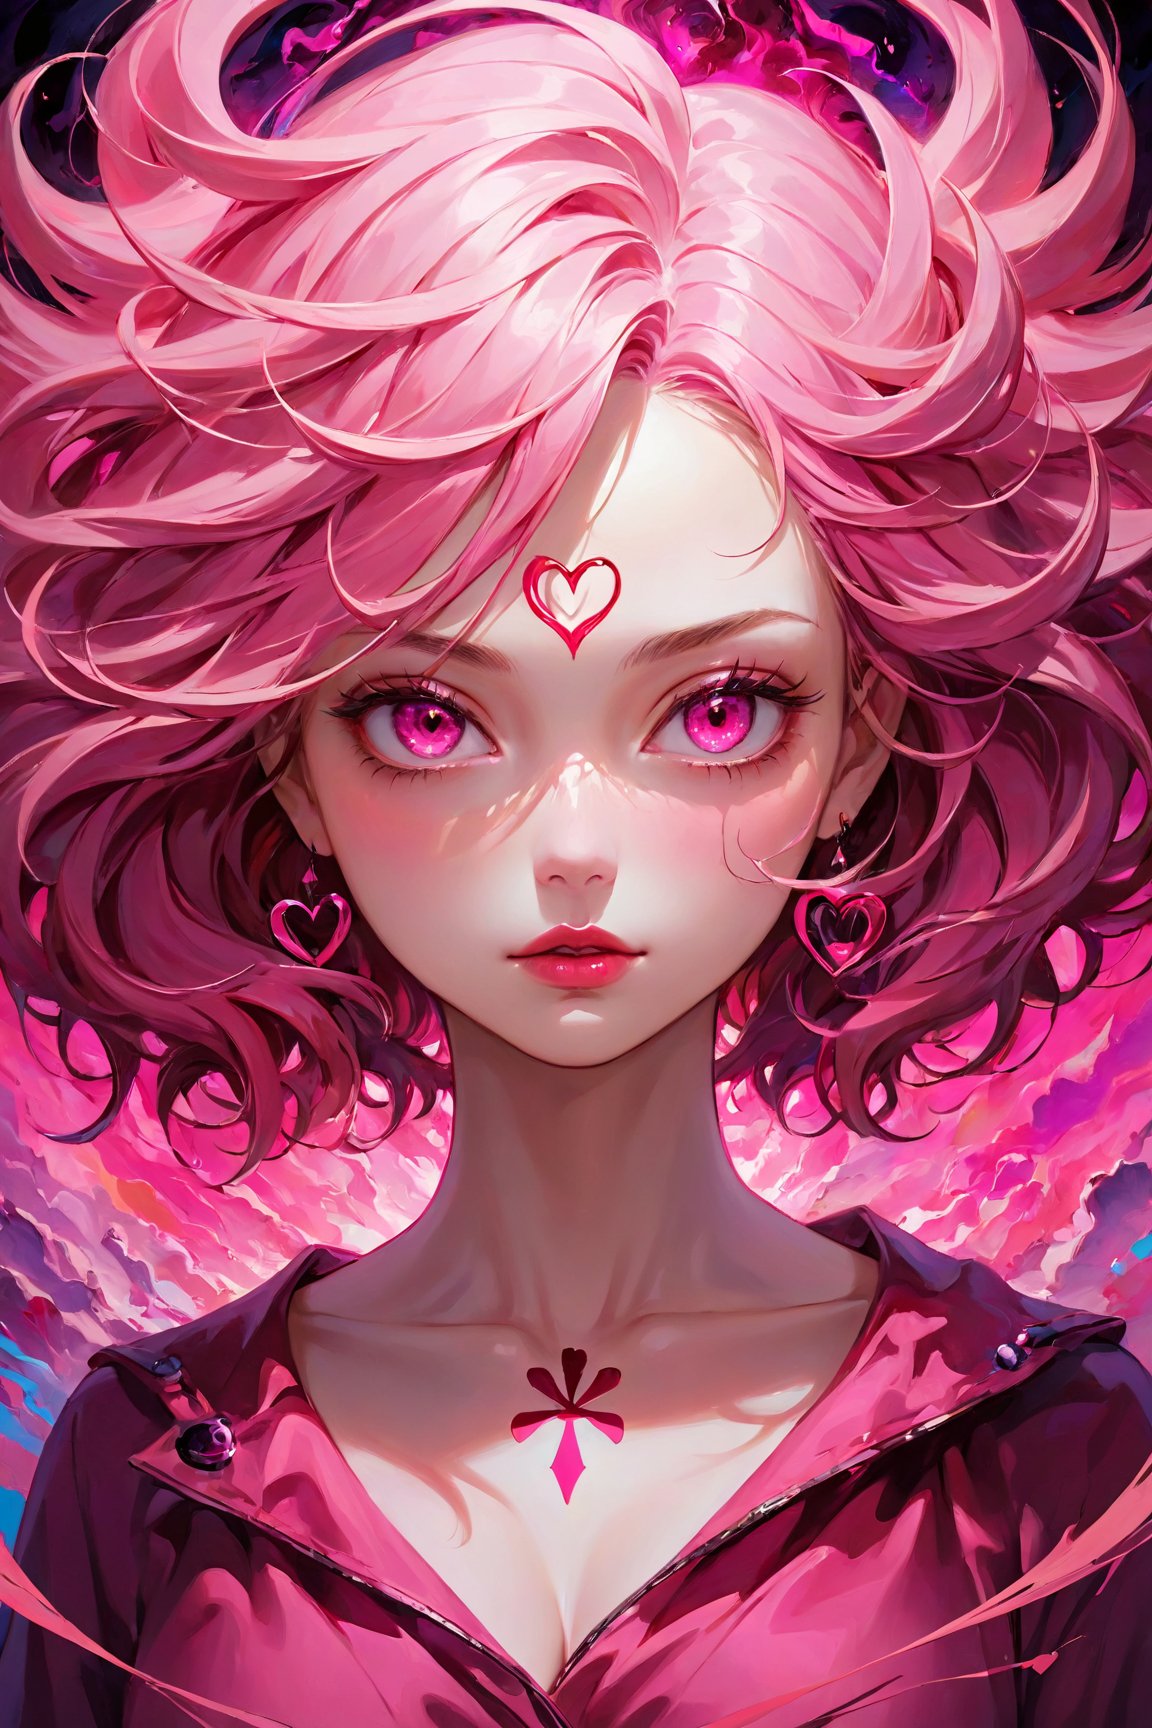 (best quality, 4k, 8k, highres, masterpiece:1.2), ultra-detailed, psychology, manipulation, dark, pink, colorful, powerful, contrasting, emotive, expressive, stylized, high contrast, dramatic lighting, surreal elements, layered textures, abstract background, vibrant tones, love symbol, woman's face obscured, complex emotions, hidden motives, vivid colors, transformative, subconscious desires, deep symbolism, human psyche analyzed, intense gaze, sinister aura, surrealistic atmosphere, figurative art, emotional manipulation, conflicting emotions, ambiguous storyline, hidden meanings, strong impact, provocative composition, intricate details, meaningful expressions, great understanding, fascinating portrayal, mesmerizing artwork, masterpiece in pink shades